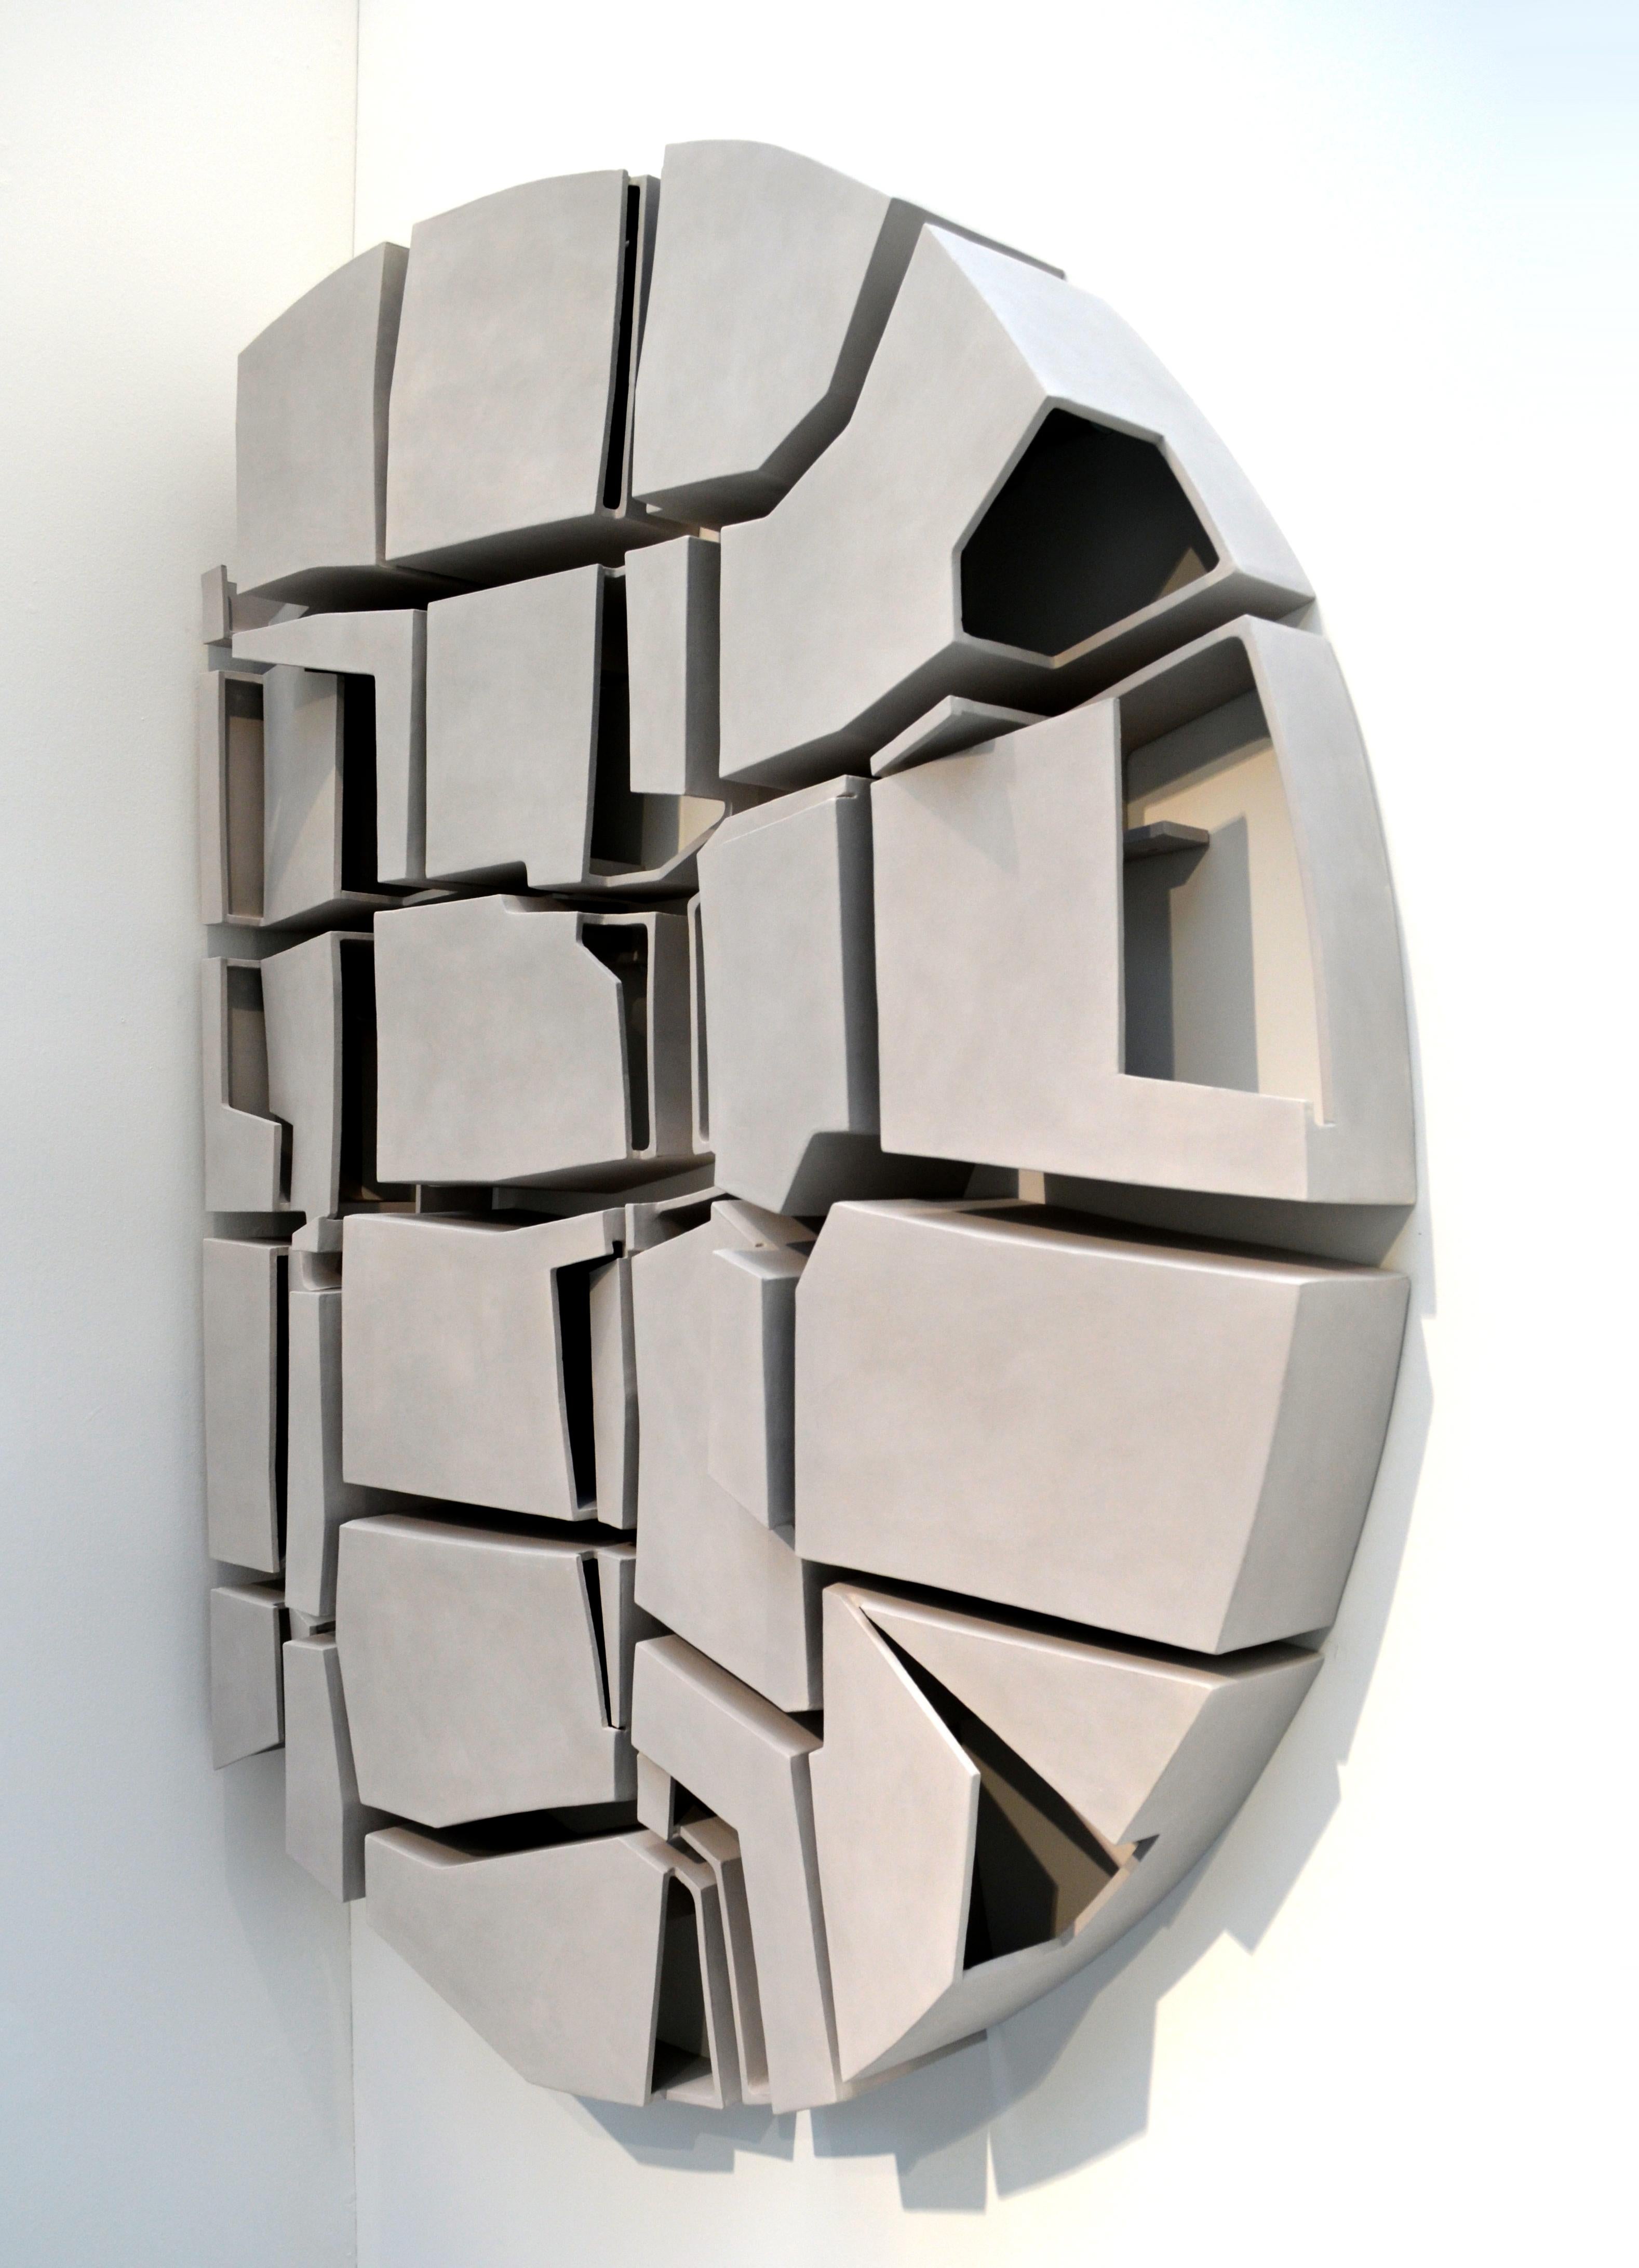 An exceptional ceramic wall decoration by Denis Castaing composed of 19 pieces.
Unique piece.
Perfect original conditions.
Signed and sold with a “Certificate of Authenticity”,
2017.